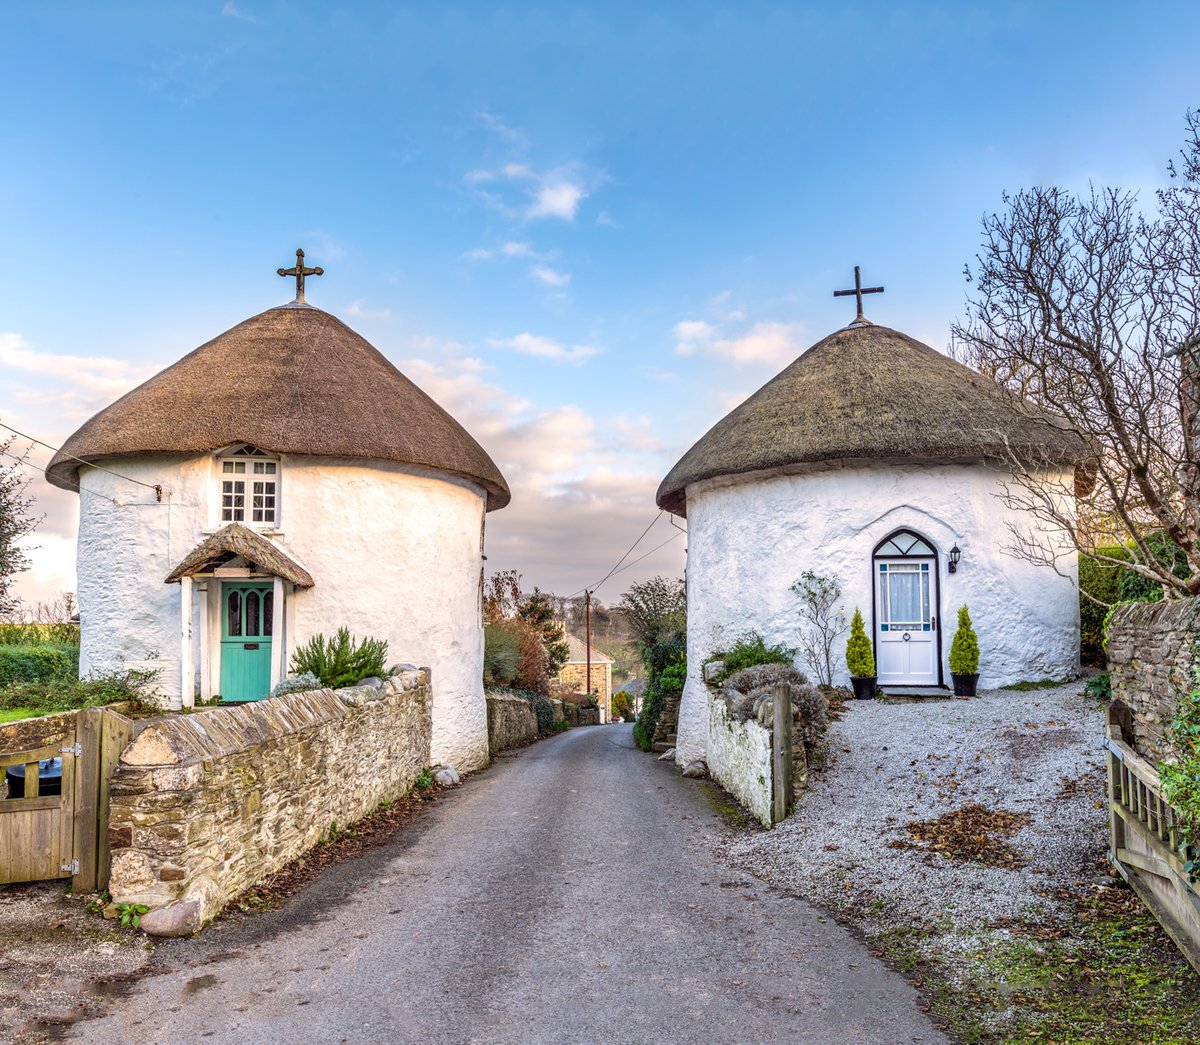 Veryan is a #coastalvillage on the #RoselandPeninsula in #Cornwall that has been described as one of Cornwall's loveliest inland villages. Still, it is probably most famous for its 19th century thatched #RoundHouses. There are five of these interesting and unusual roundhouses.